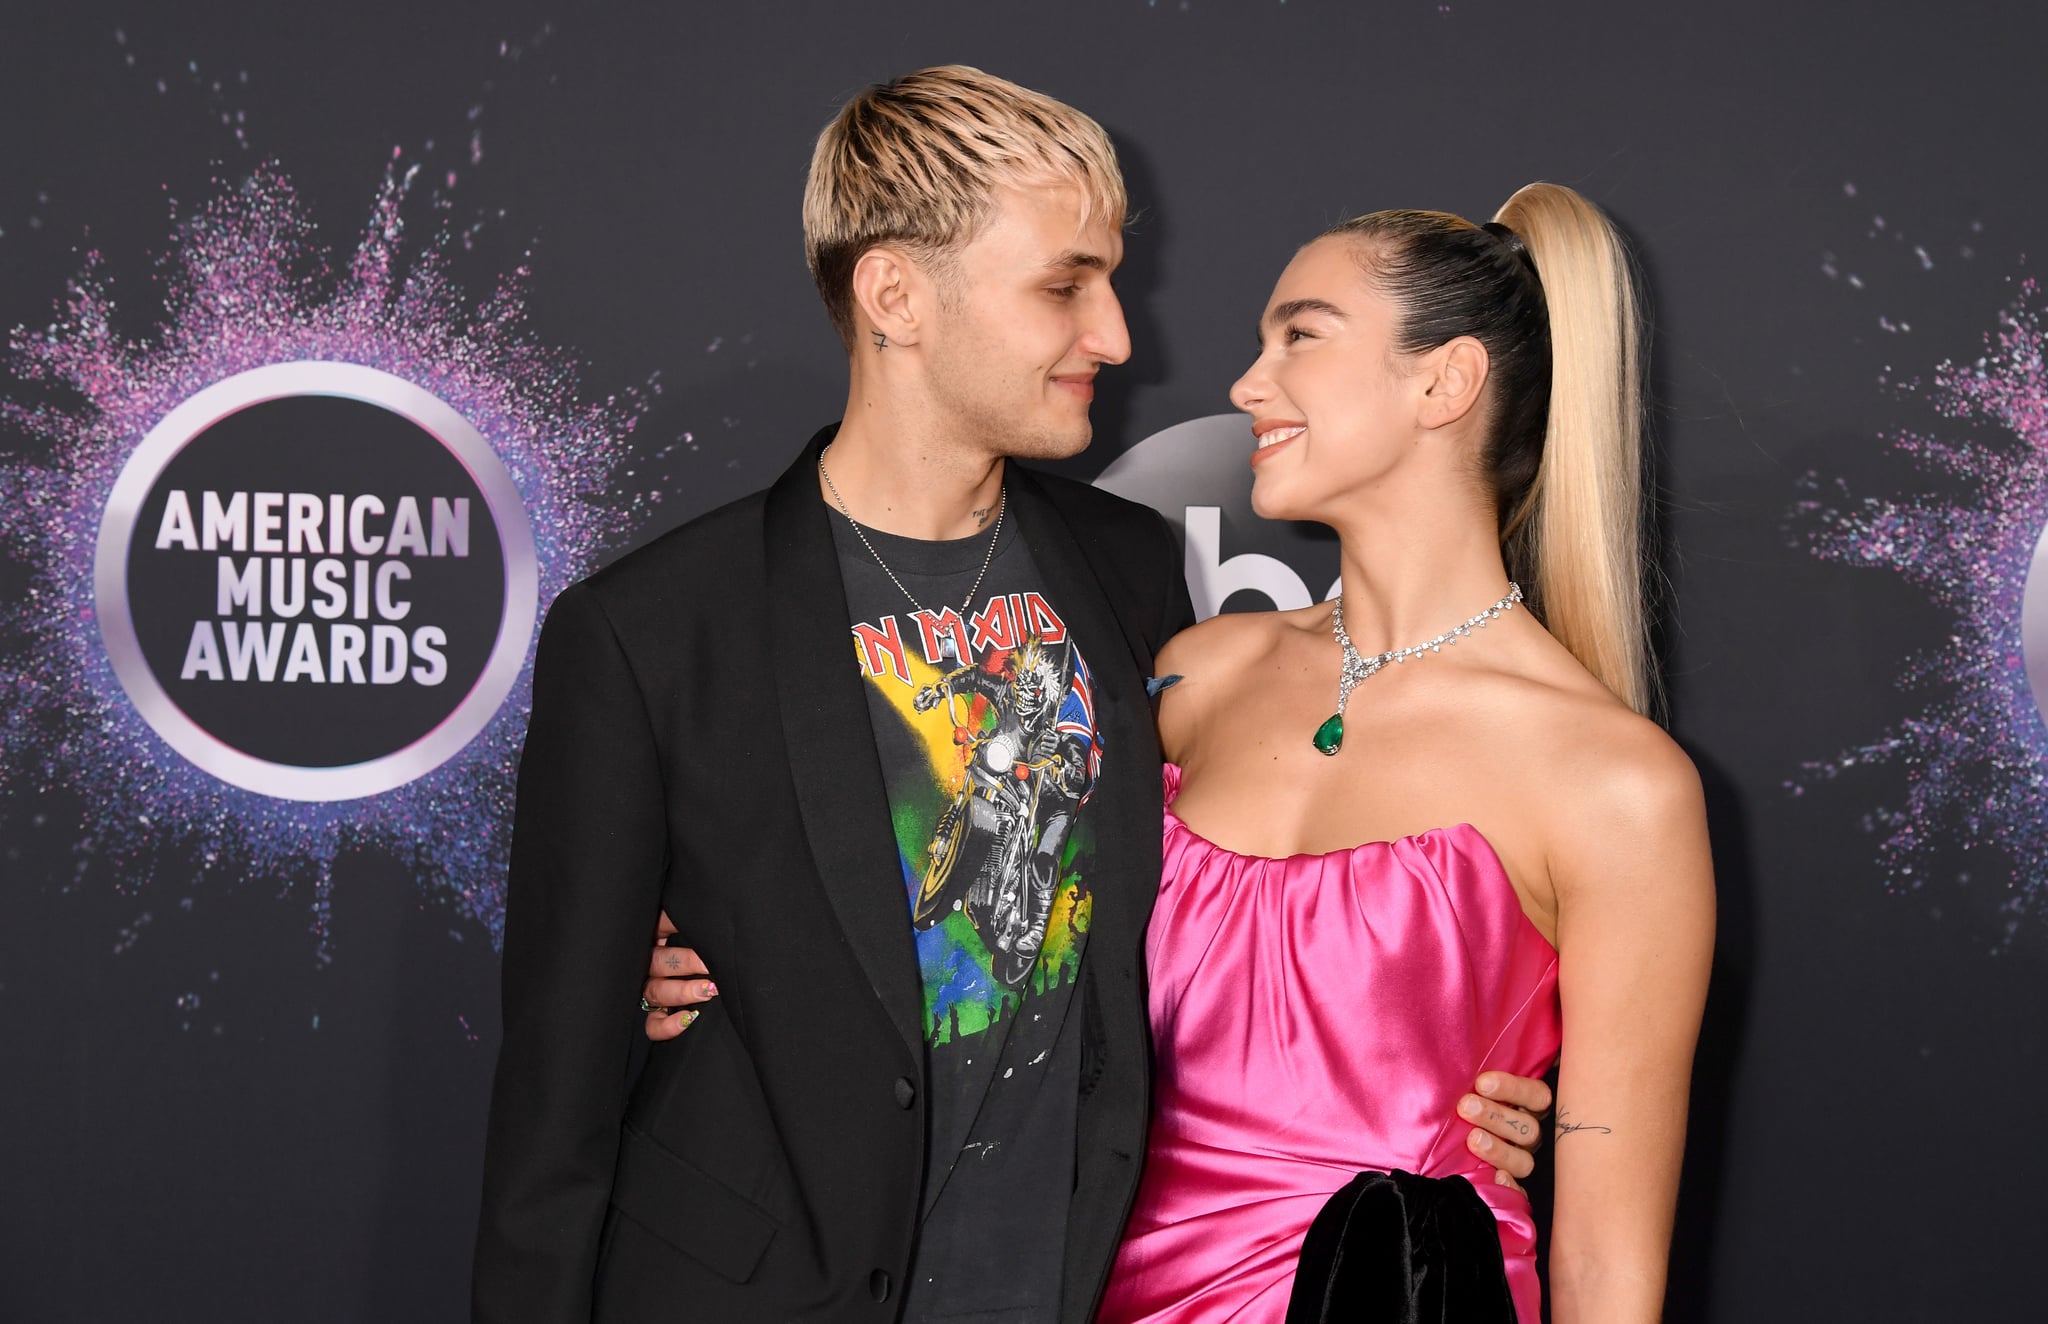 LOS ANGELES, CALIFORNIA - NOVEMBER 24: (L-R) Anwar Hadid and Dua Lipa attend the 2019 American Music Awards at Microsoft Theater on November 24, 2019 in Los Angeles, California. (Photo by Jeff Kravitz/FilmMagic for dcp)